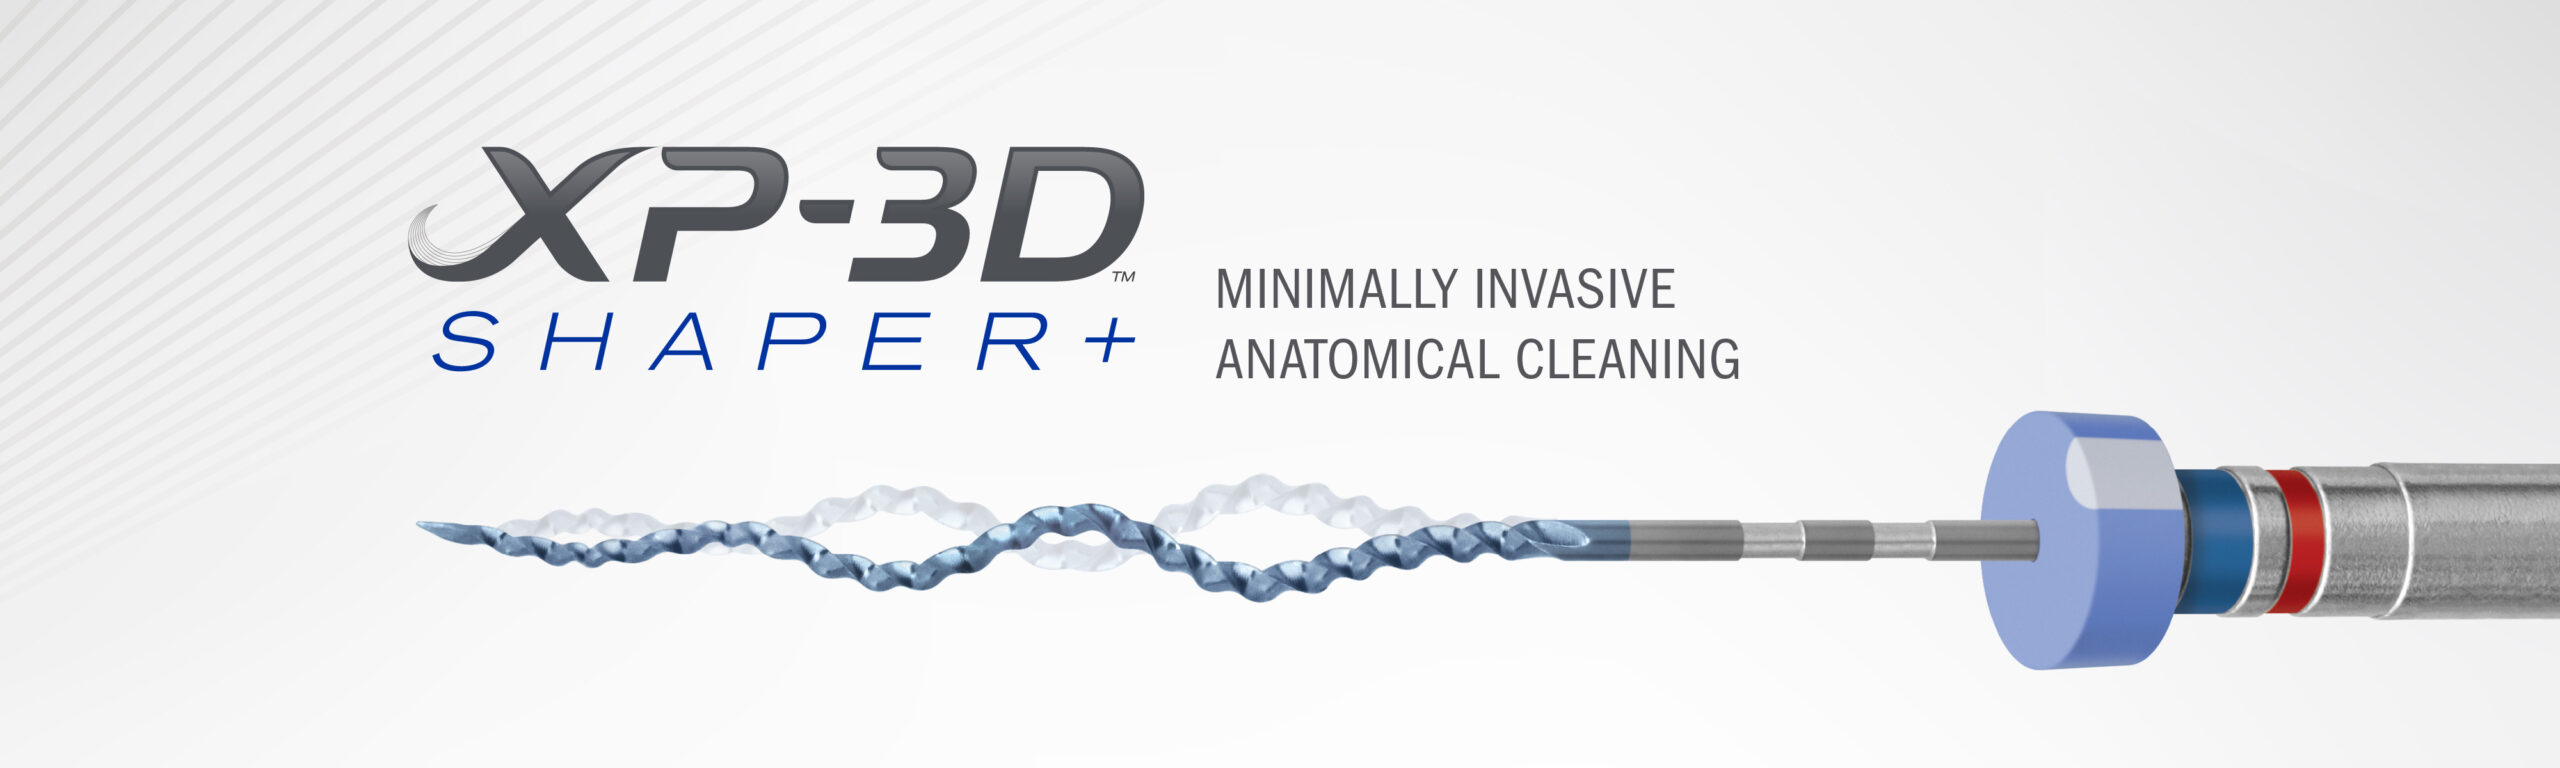 XP-3D Shaper. Minimally Invasive. Anatomical Cleaning. By Brasseler USA